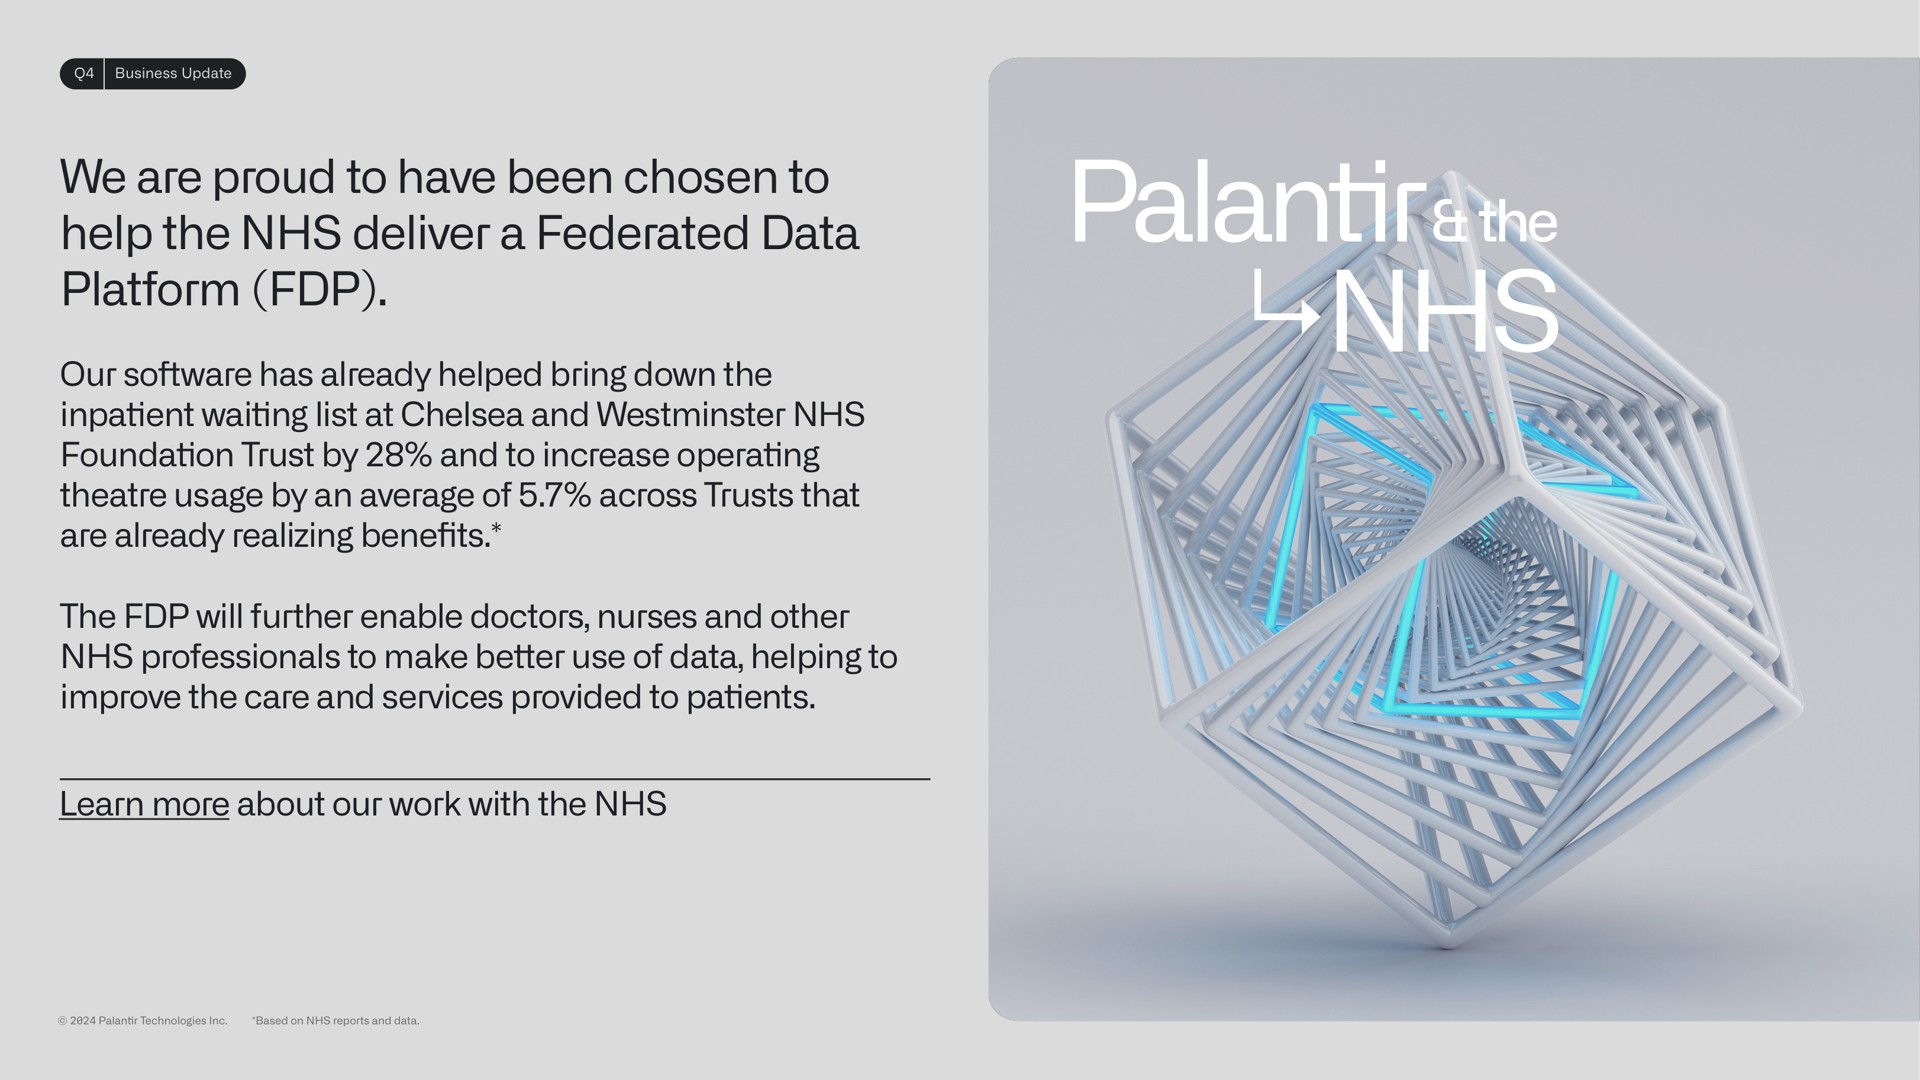 the we are to have been chosen to help the deliver a federated data platform our has already helped bring down the inpatient waiting list at and foundation trust by and to increase operating usage by an average of across trusts that are already realizing bene the will further enable doctors nurses and other professionals to make better use of data helping to improve the care and services provided to patients learn more about our work with the benefits | Palantir